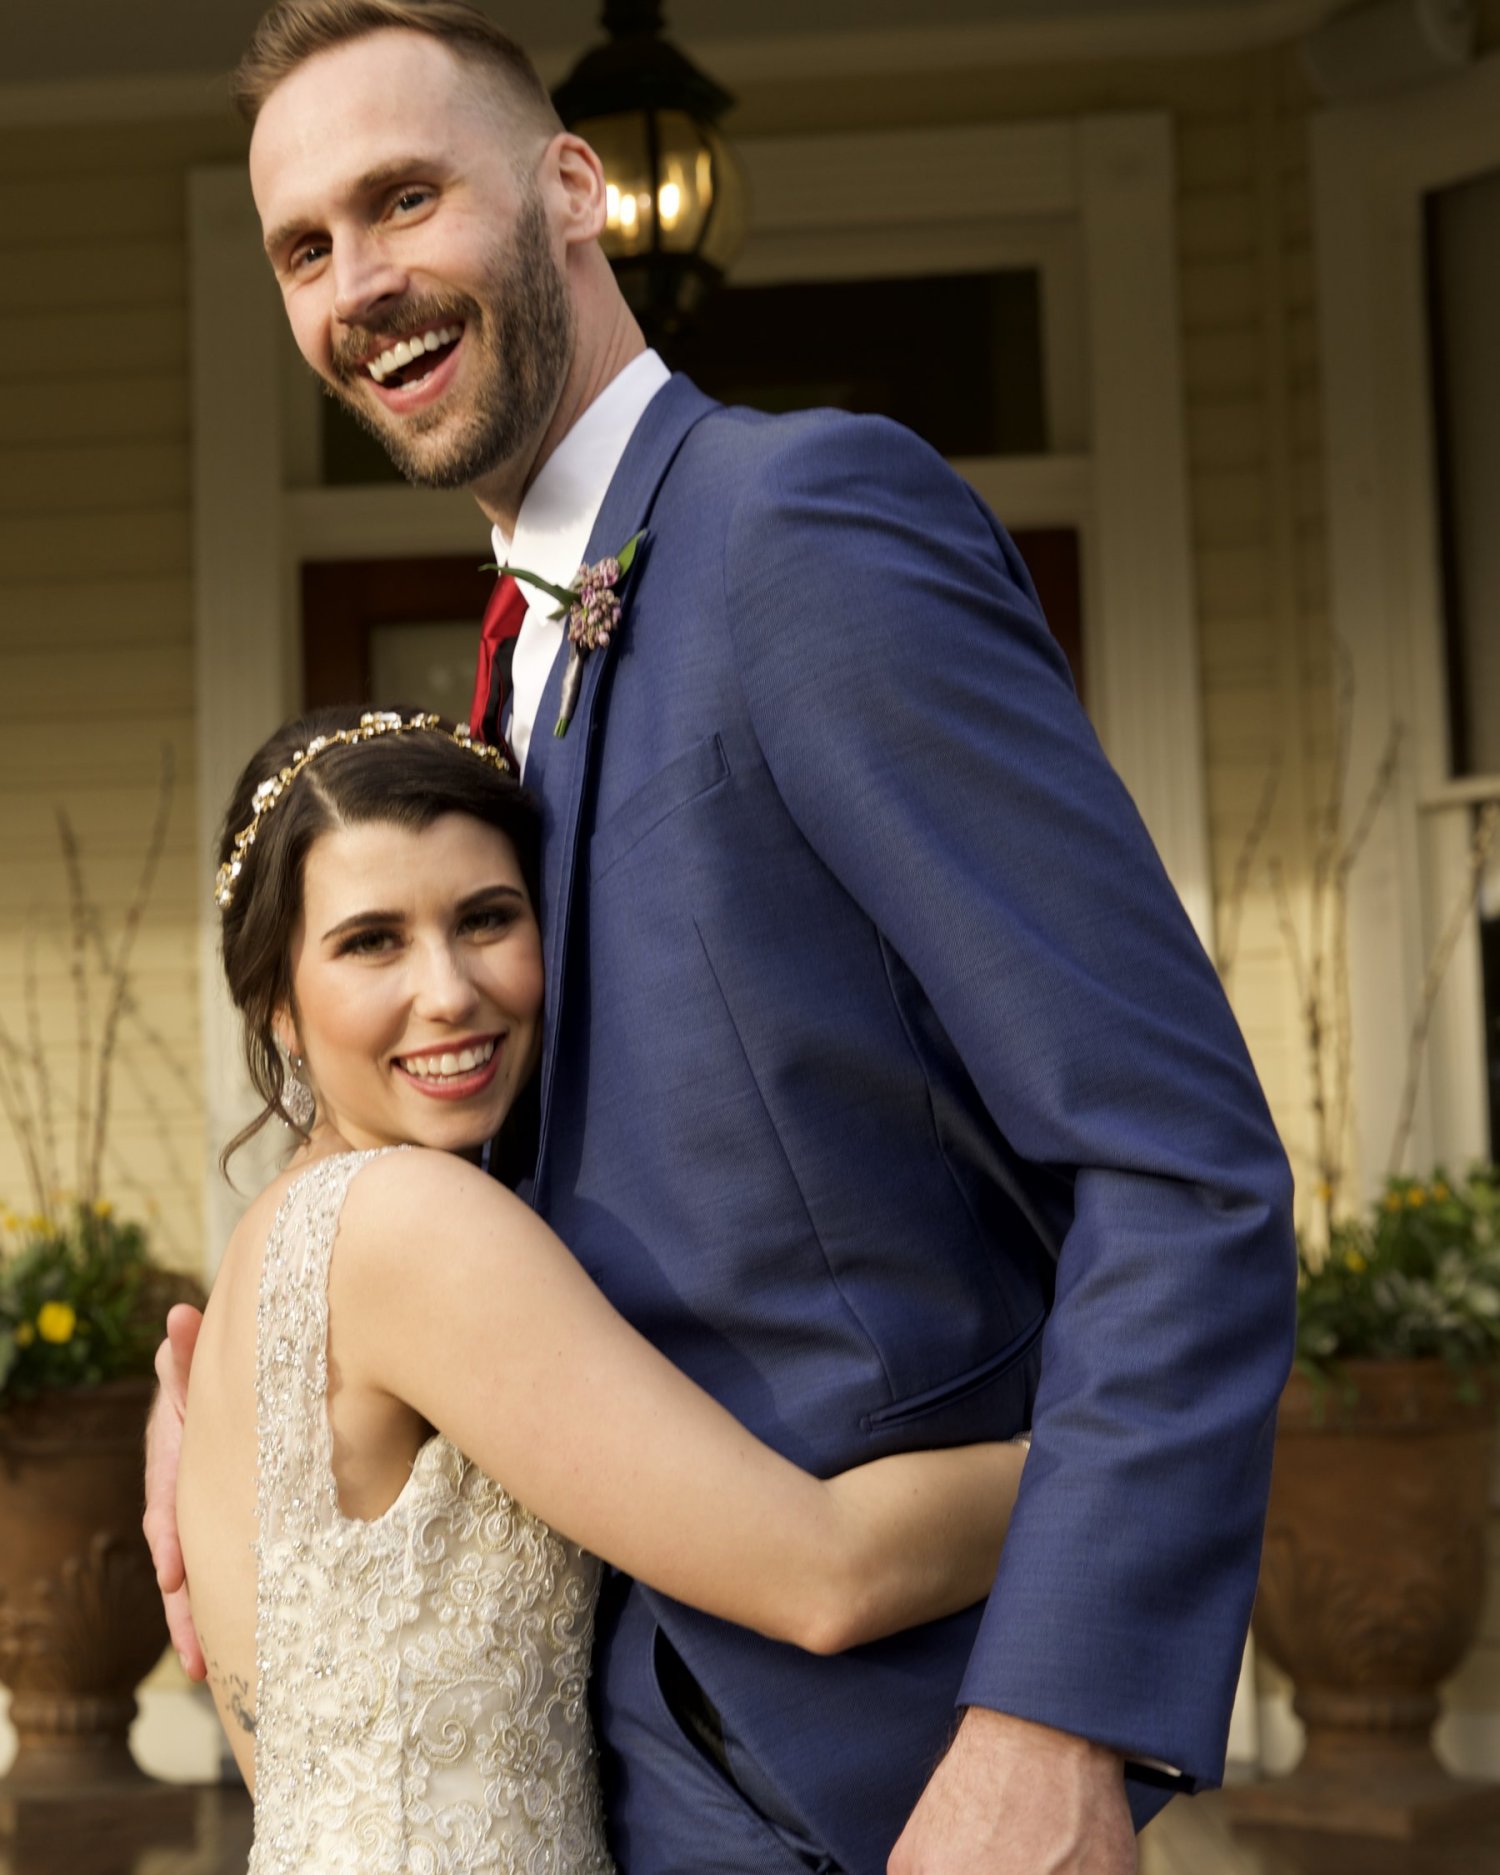 'Married at First Sight' Couples: Who is still together now? Who has